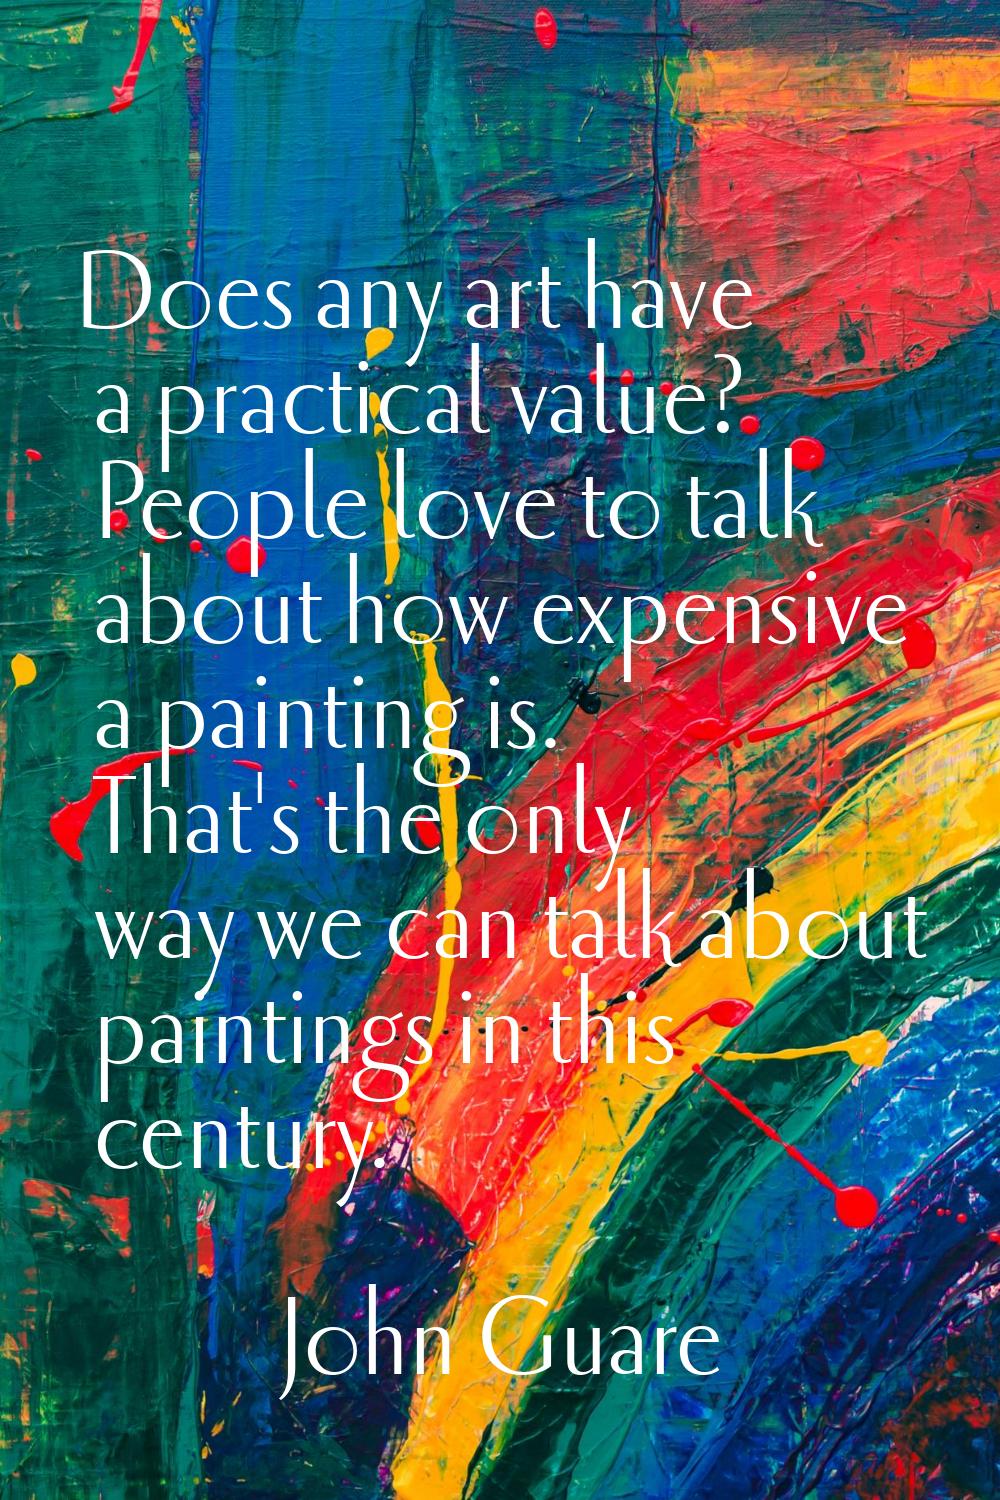 Does any art have a practical value? People love to talk about how expensive a painting is. That's 